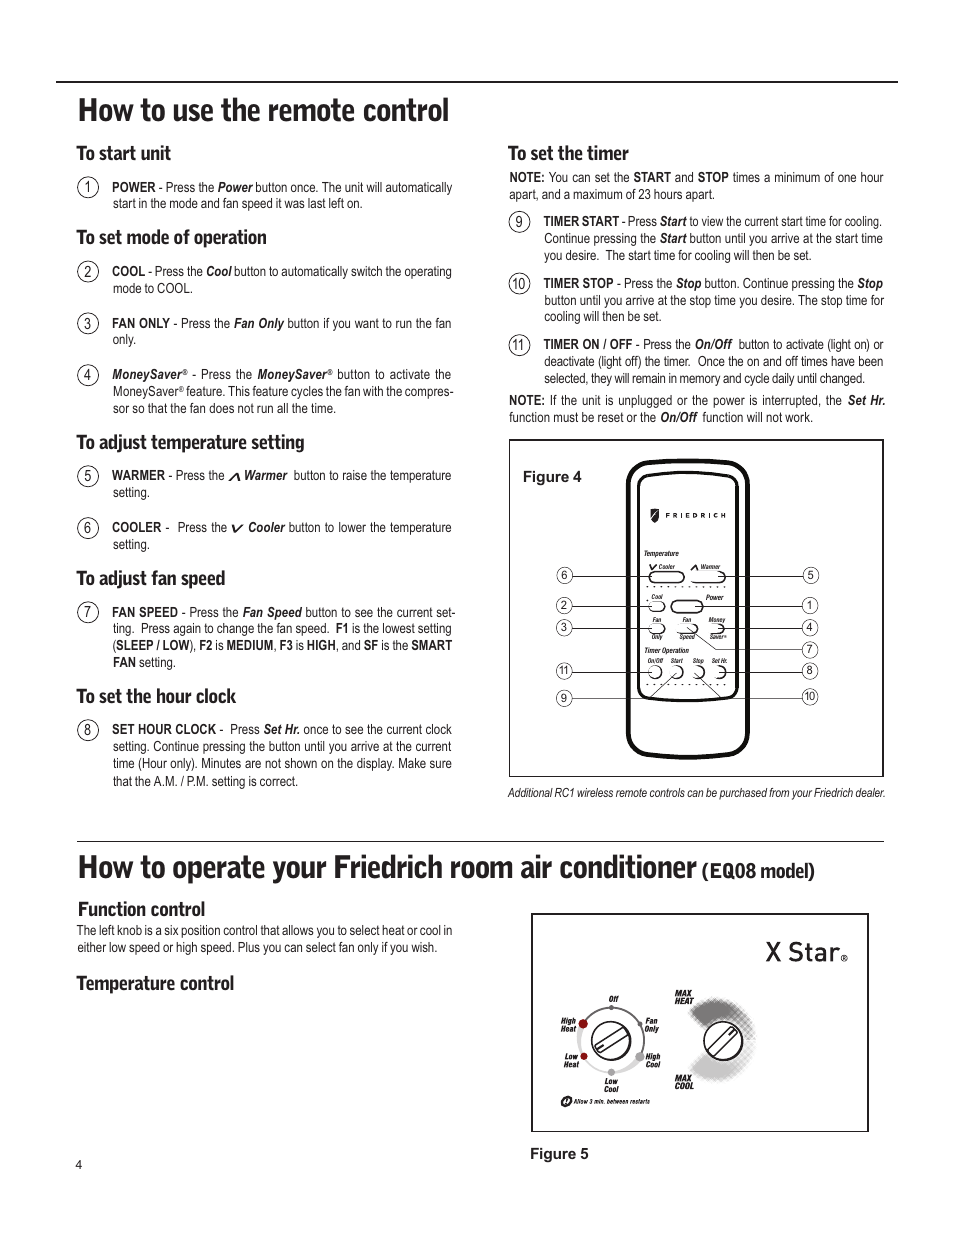 How to use the remote control, How to operate your friedrich room air  conditioner, Eq08 model) | Friedrich X Star EQ08 User Manual | Page 6 / 44  | Original mode